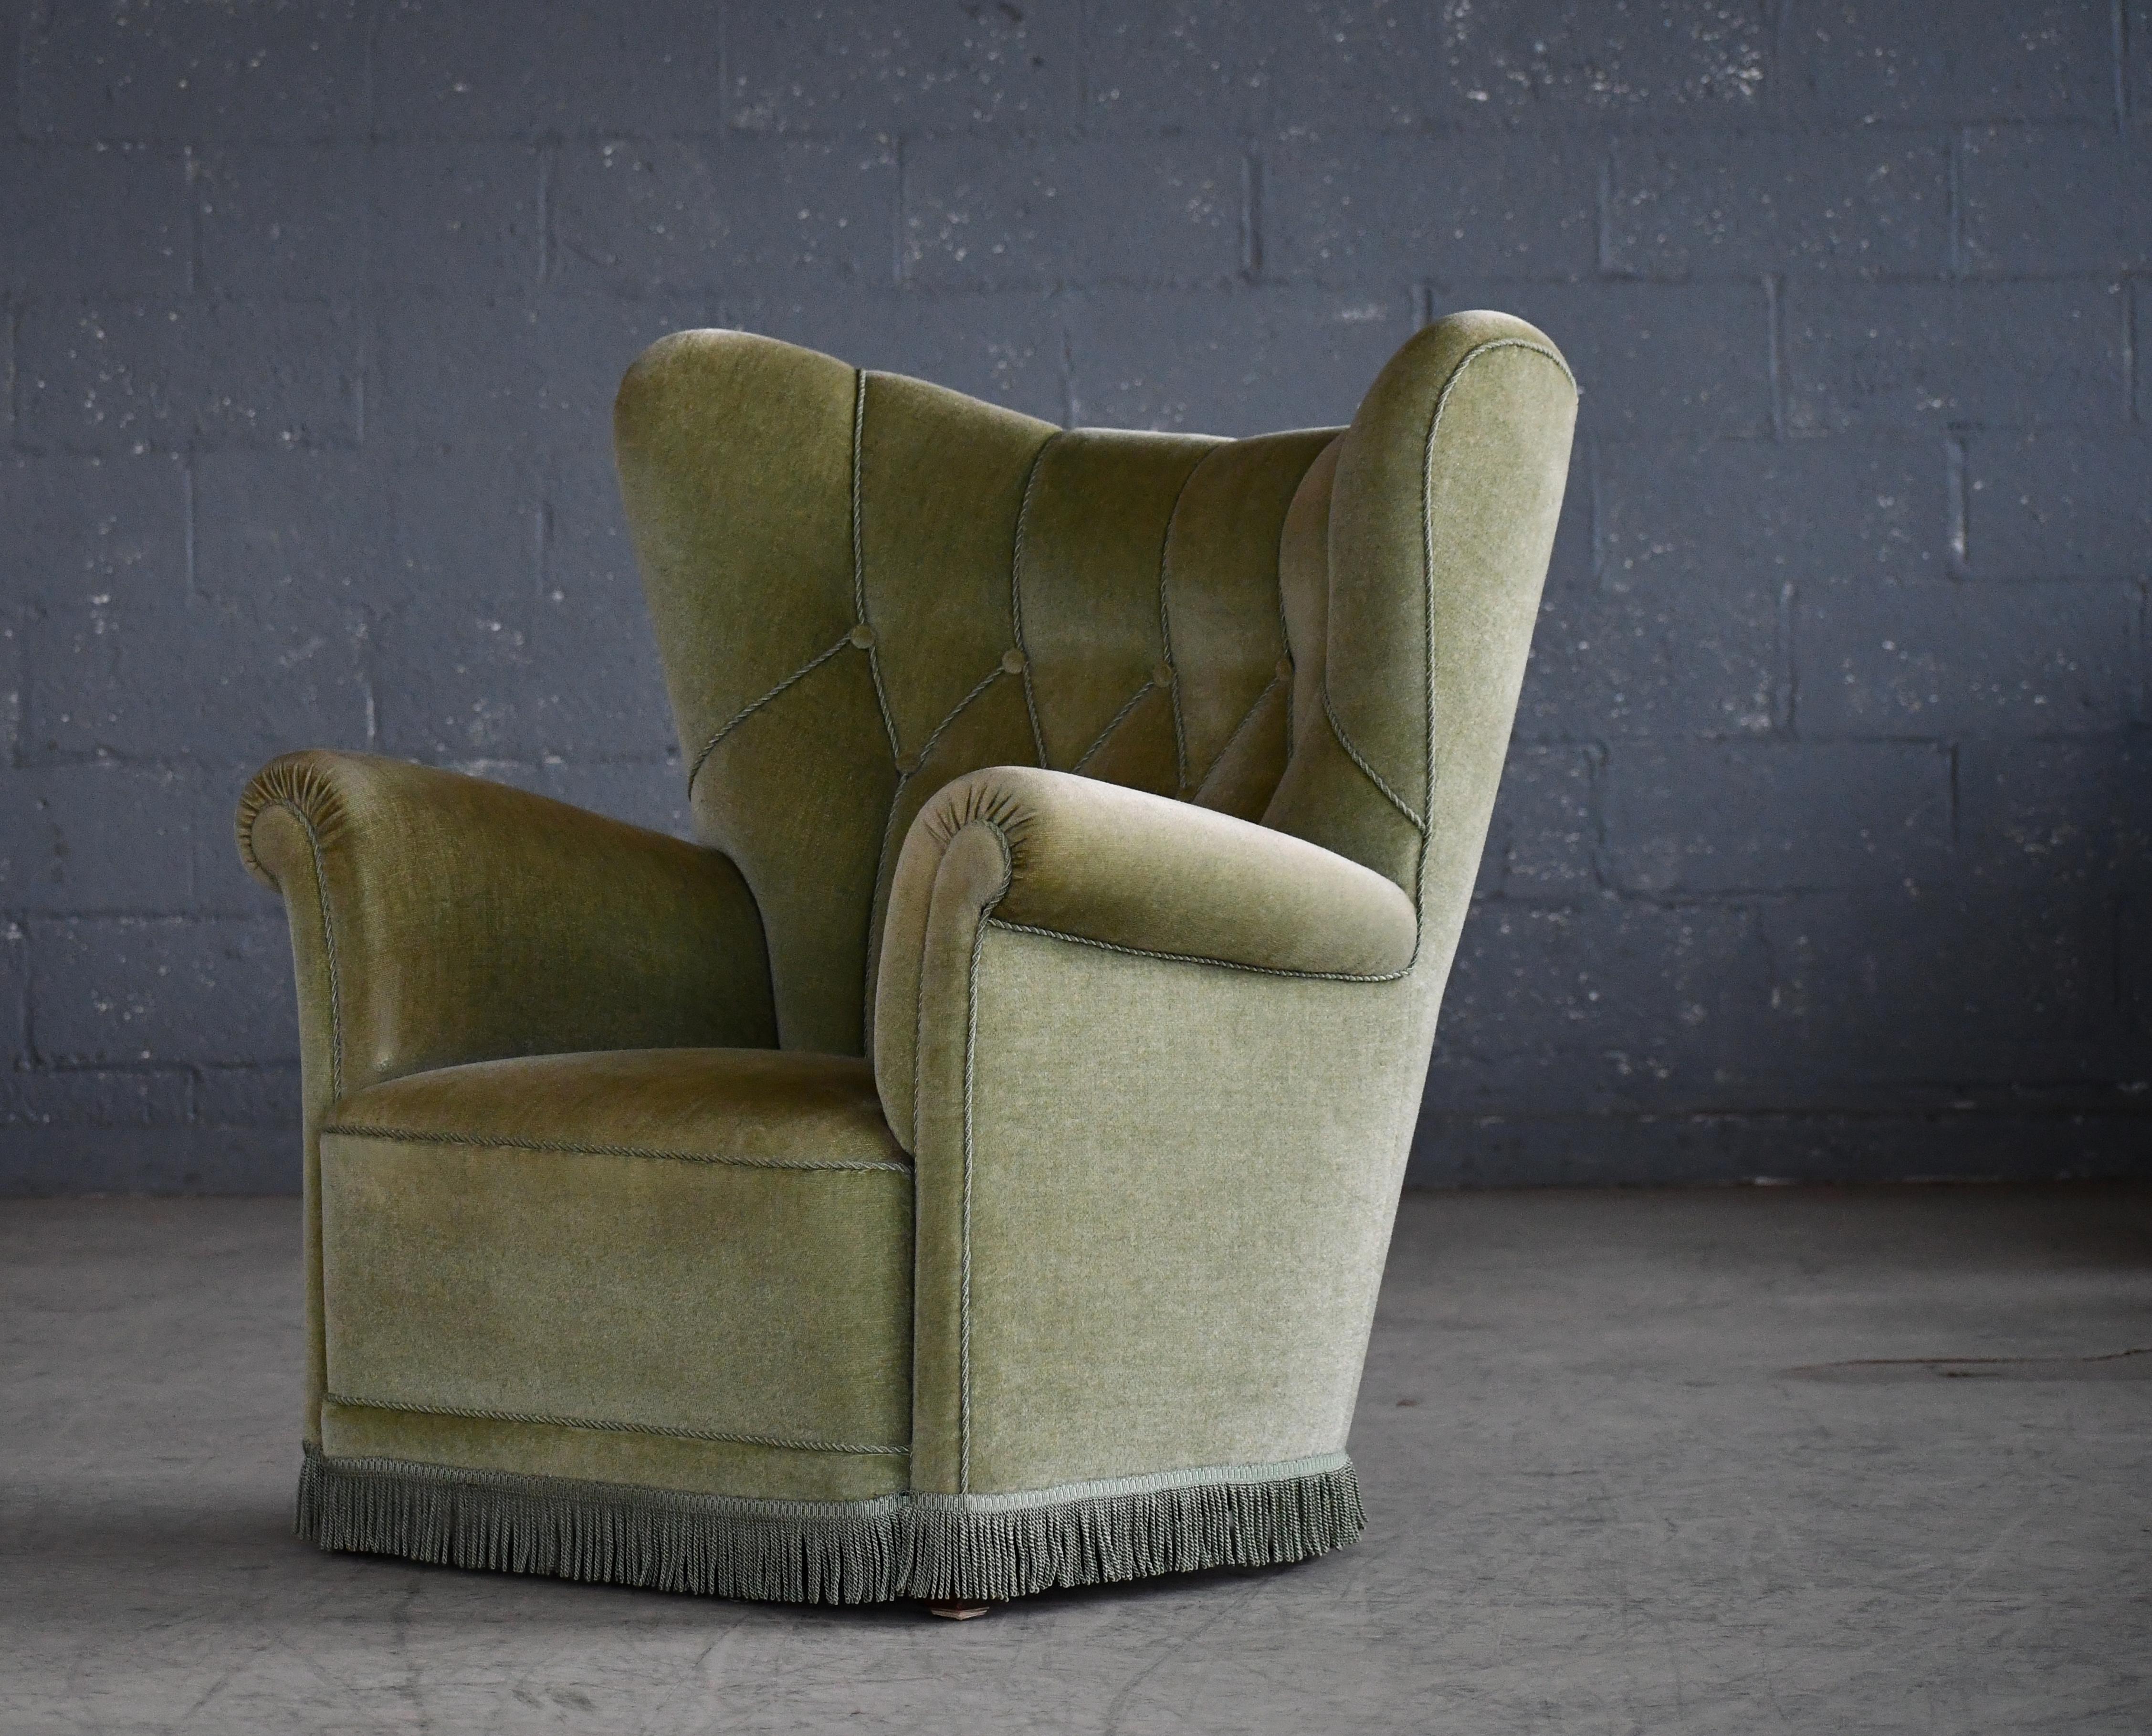 Danish Mid-Century Lounge or Club Chair in Green Mohair, 1940's For Sale 4